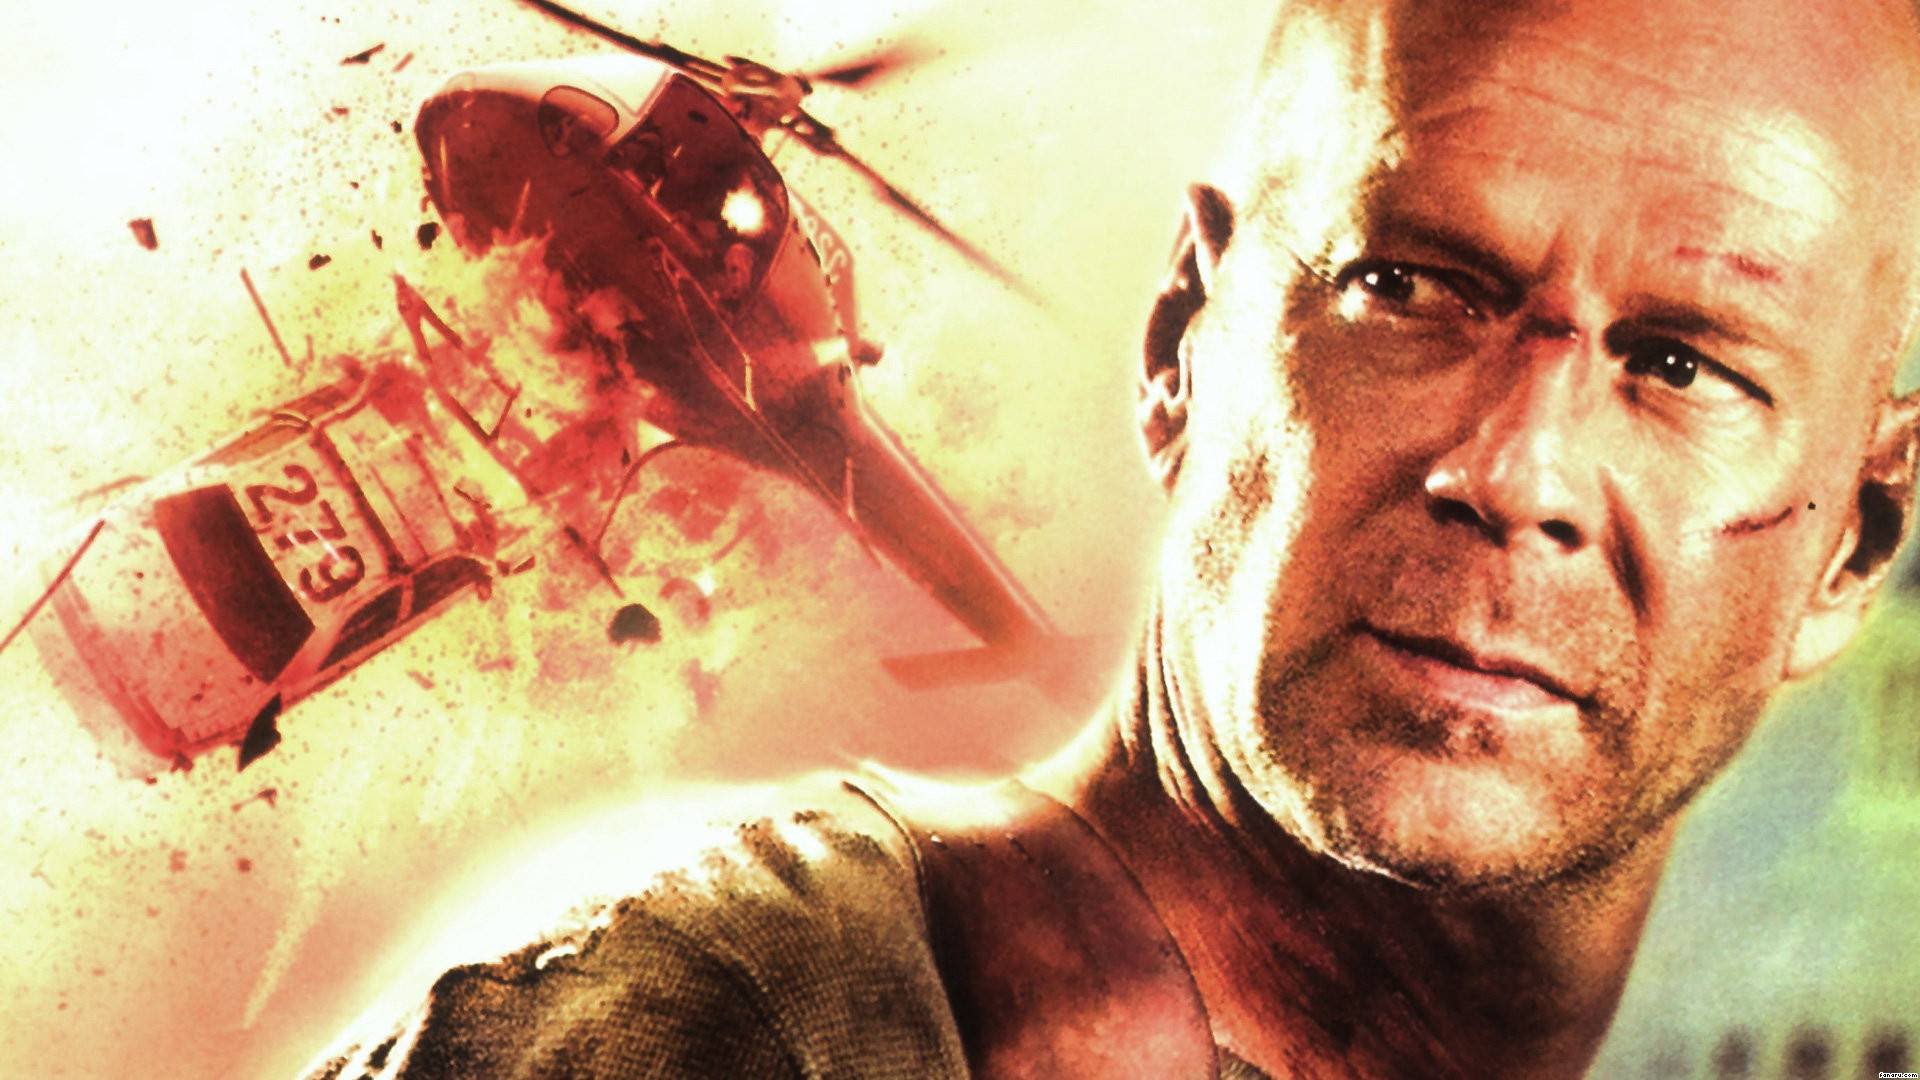 Live Free Or Die Hard Backgrounds, Compatible - PC, Mobile, Gadgets| 1920x1080 px